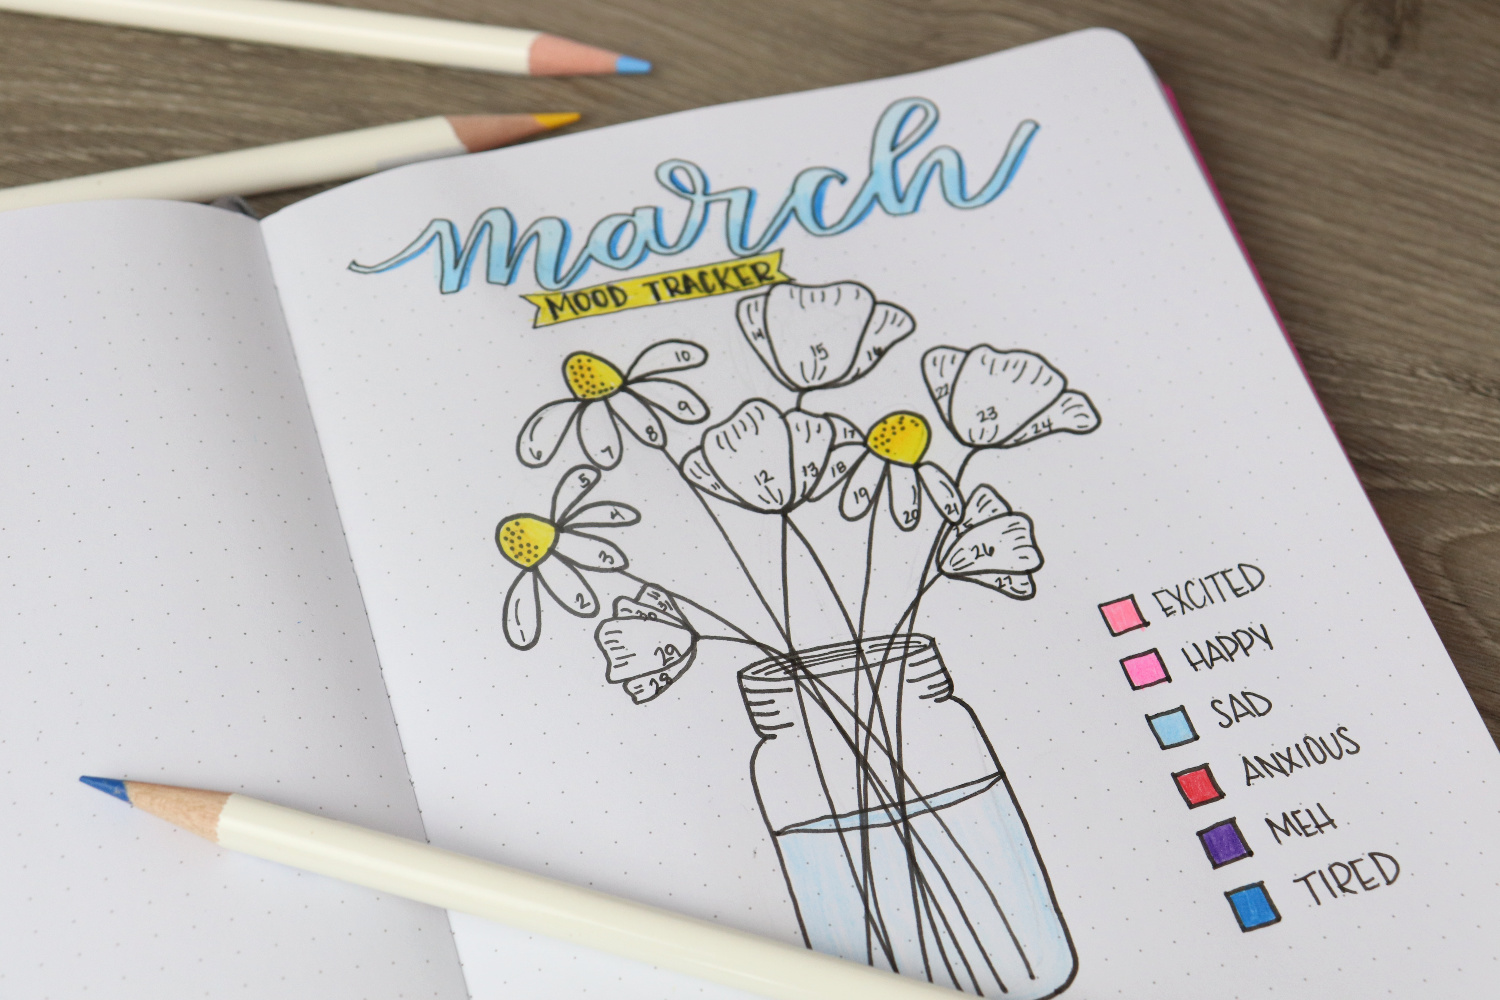 Image contains an open sketchbook with a floral mood tracker page. Three colored pencils lay around the page on a wooden desk.